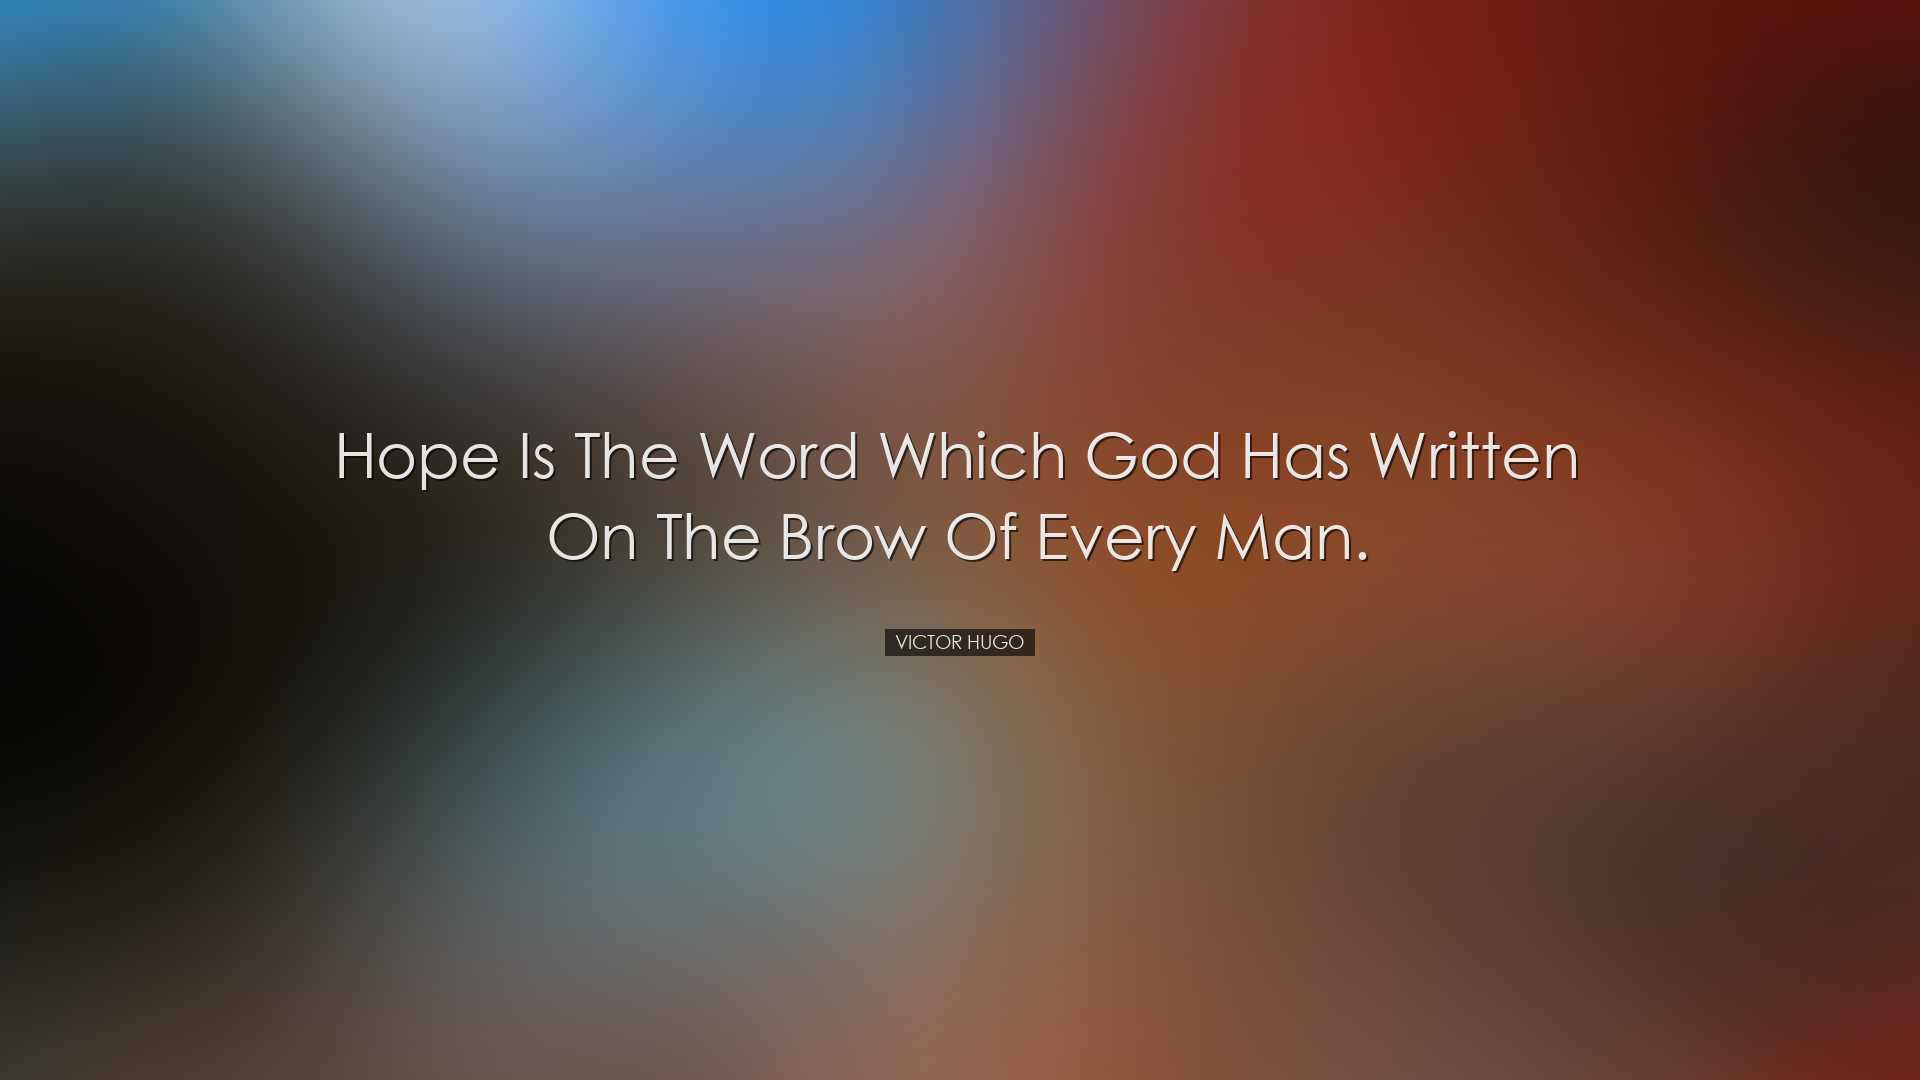 Hope is the word which God has written on the brow of every man. -